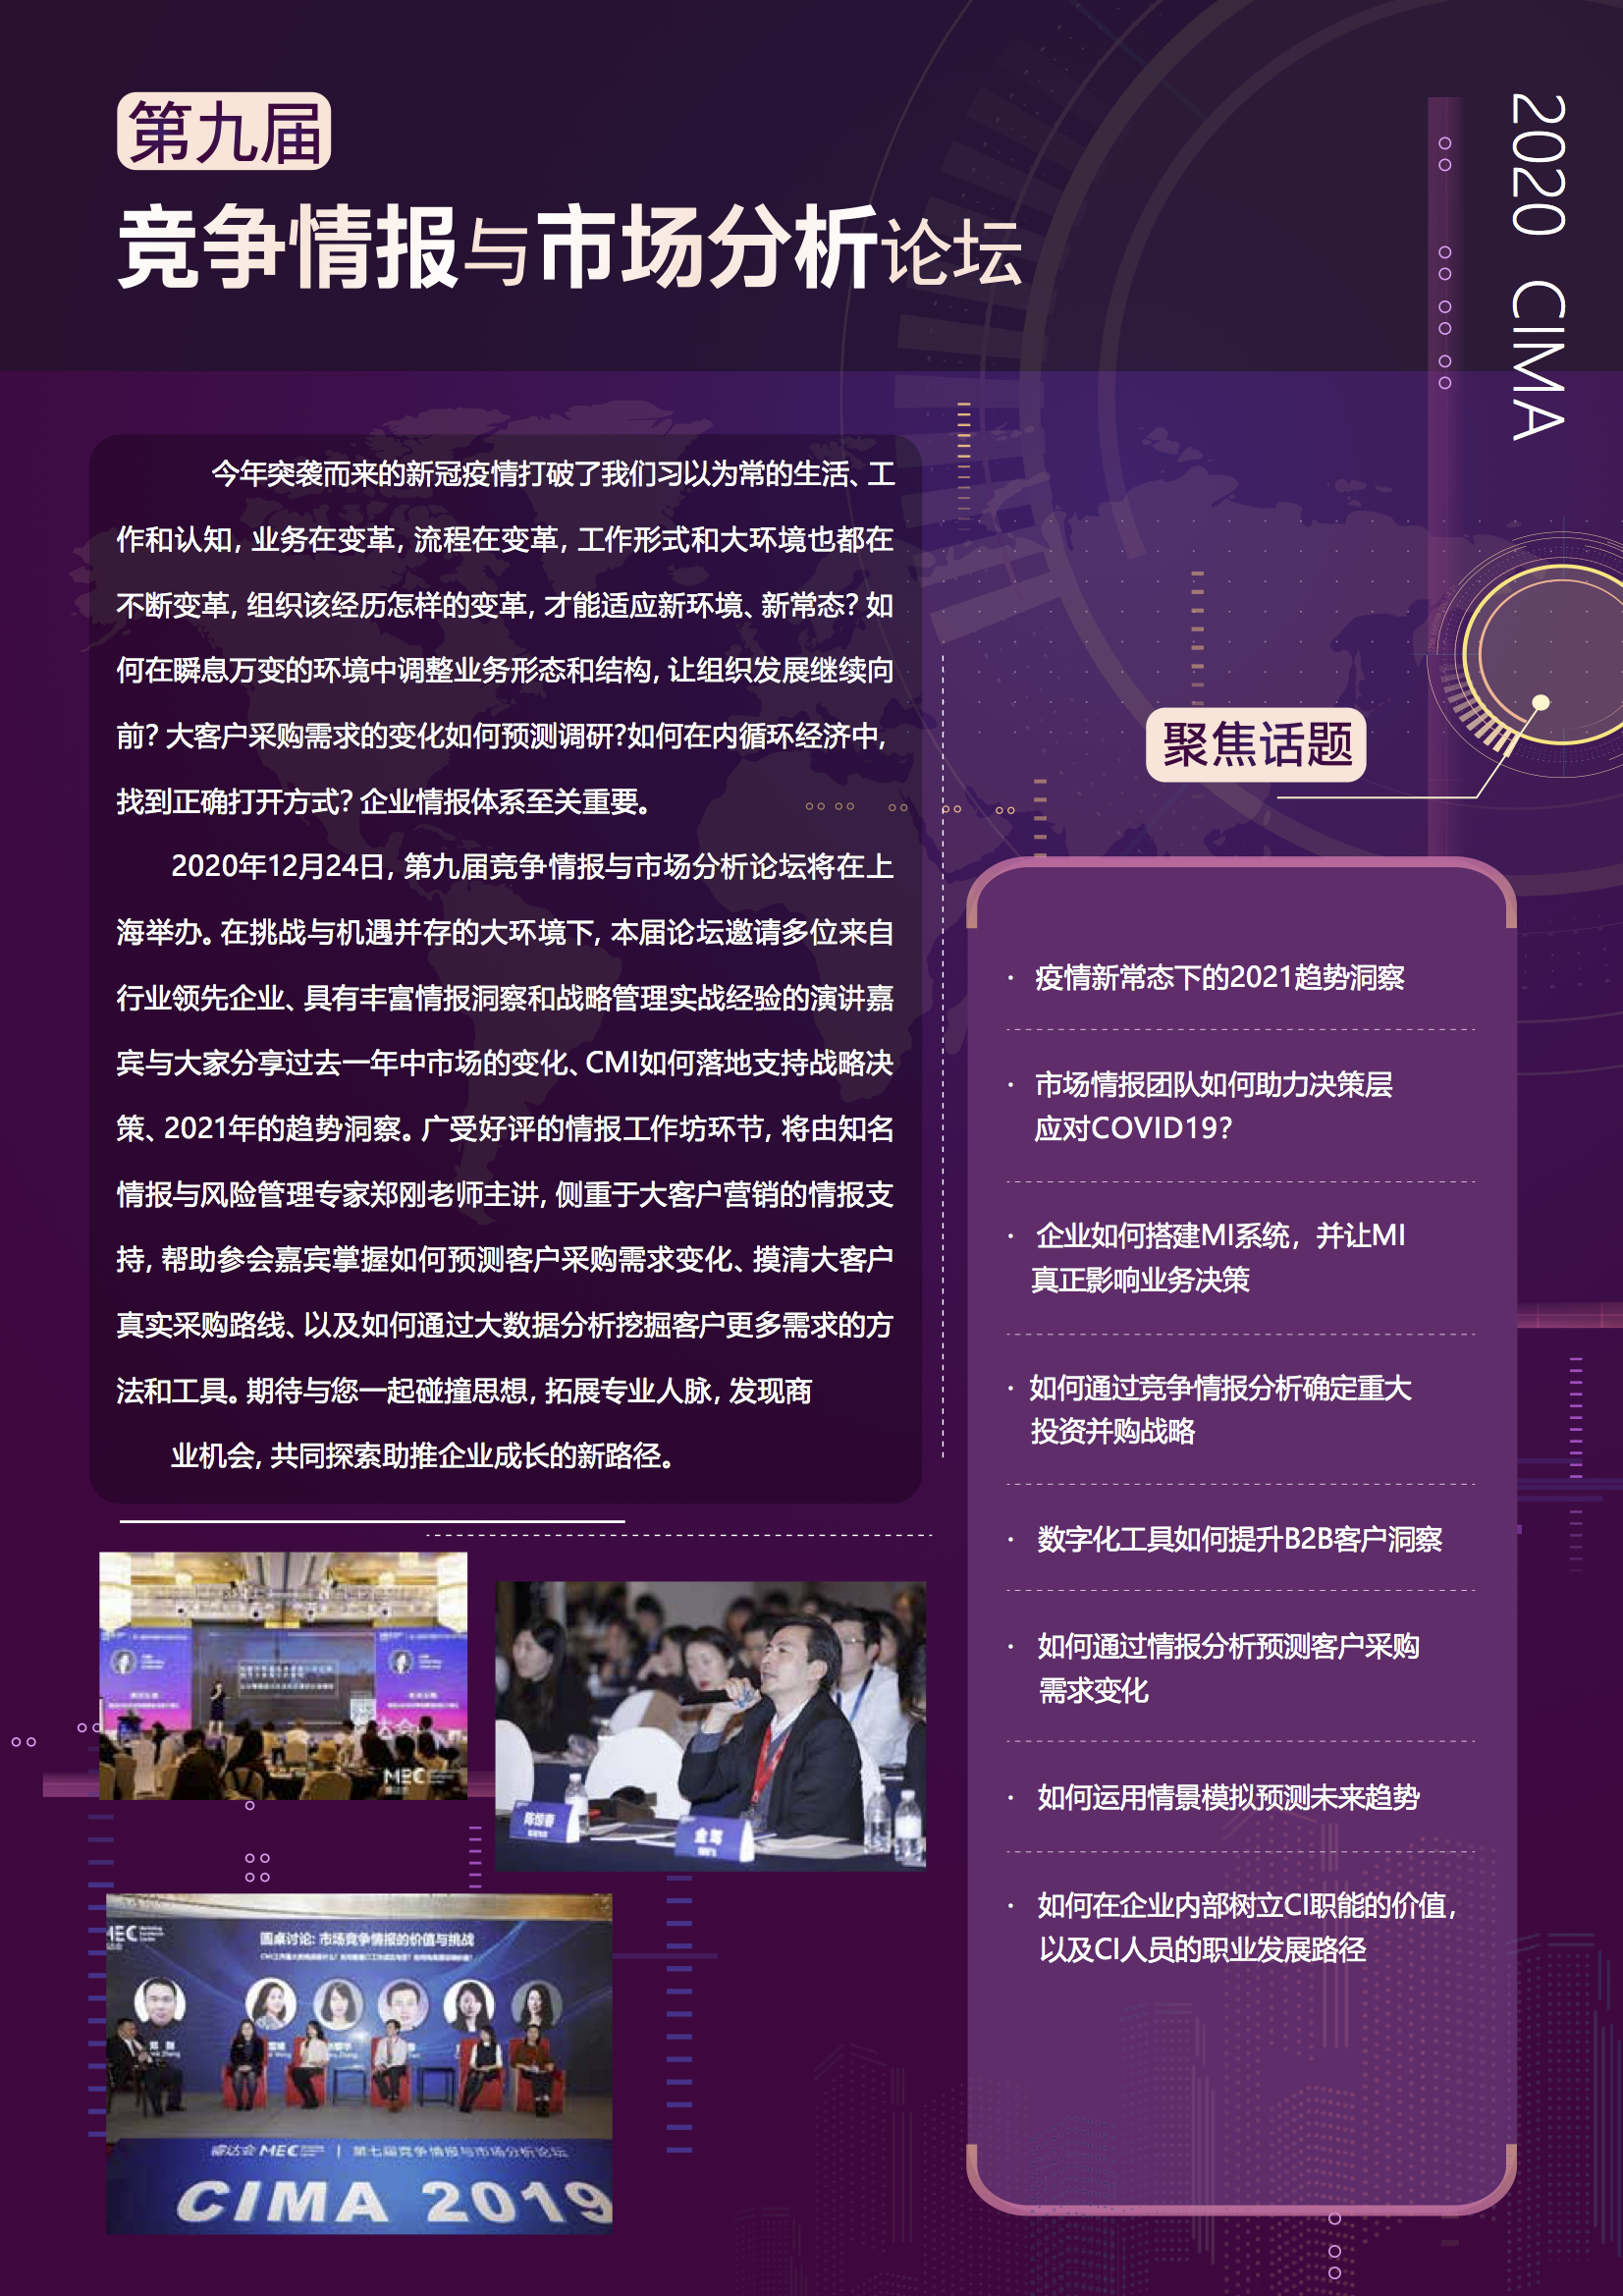 9th CIMA brochure updated2.png